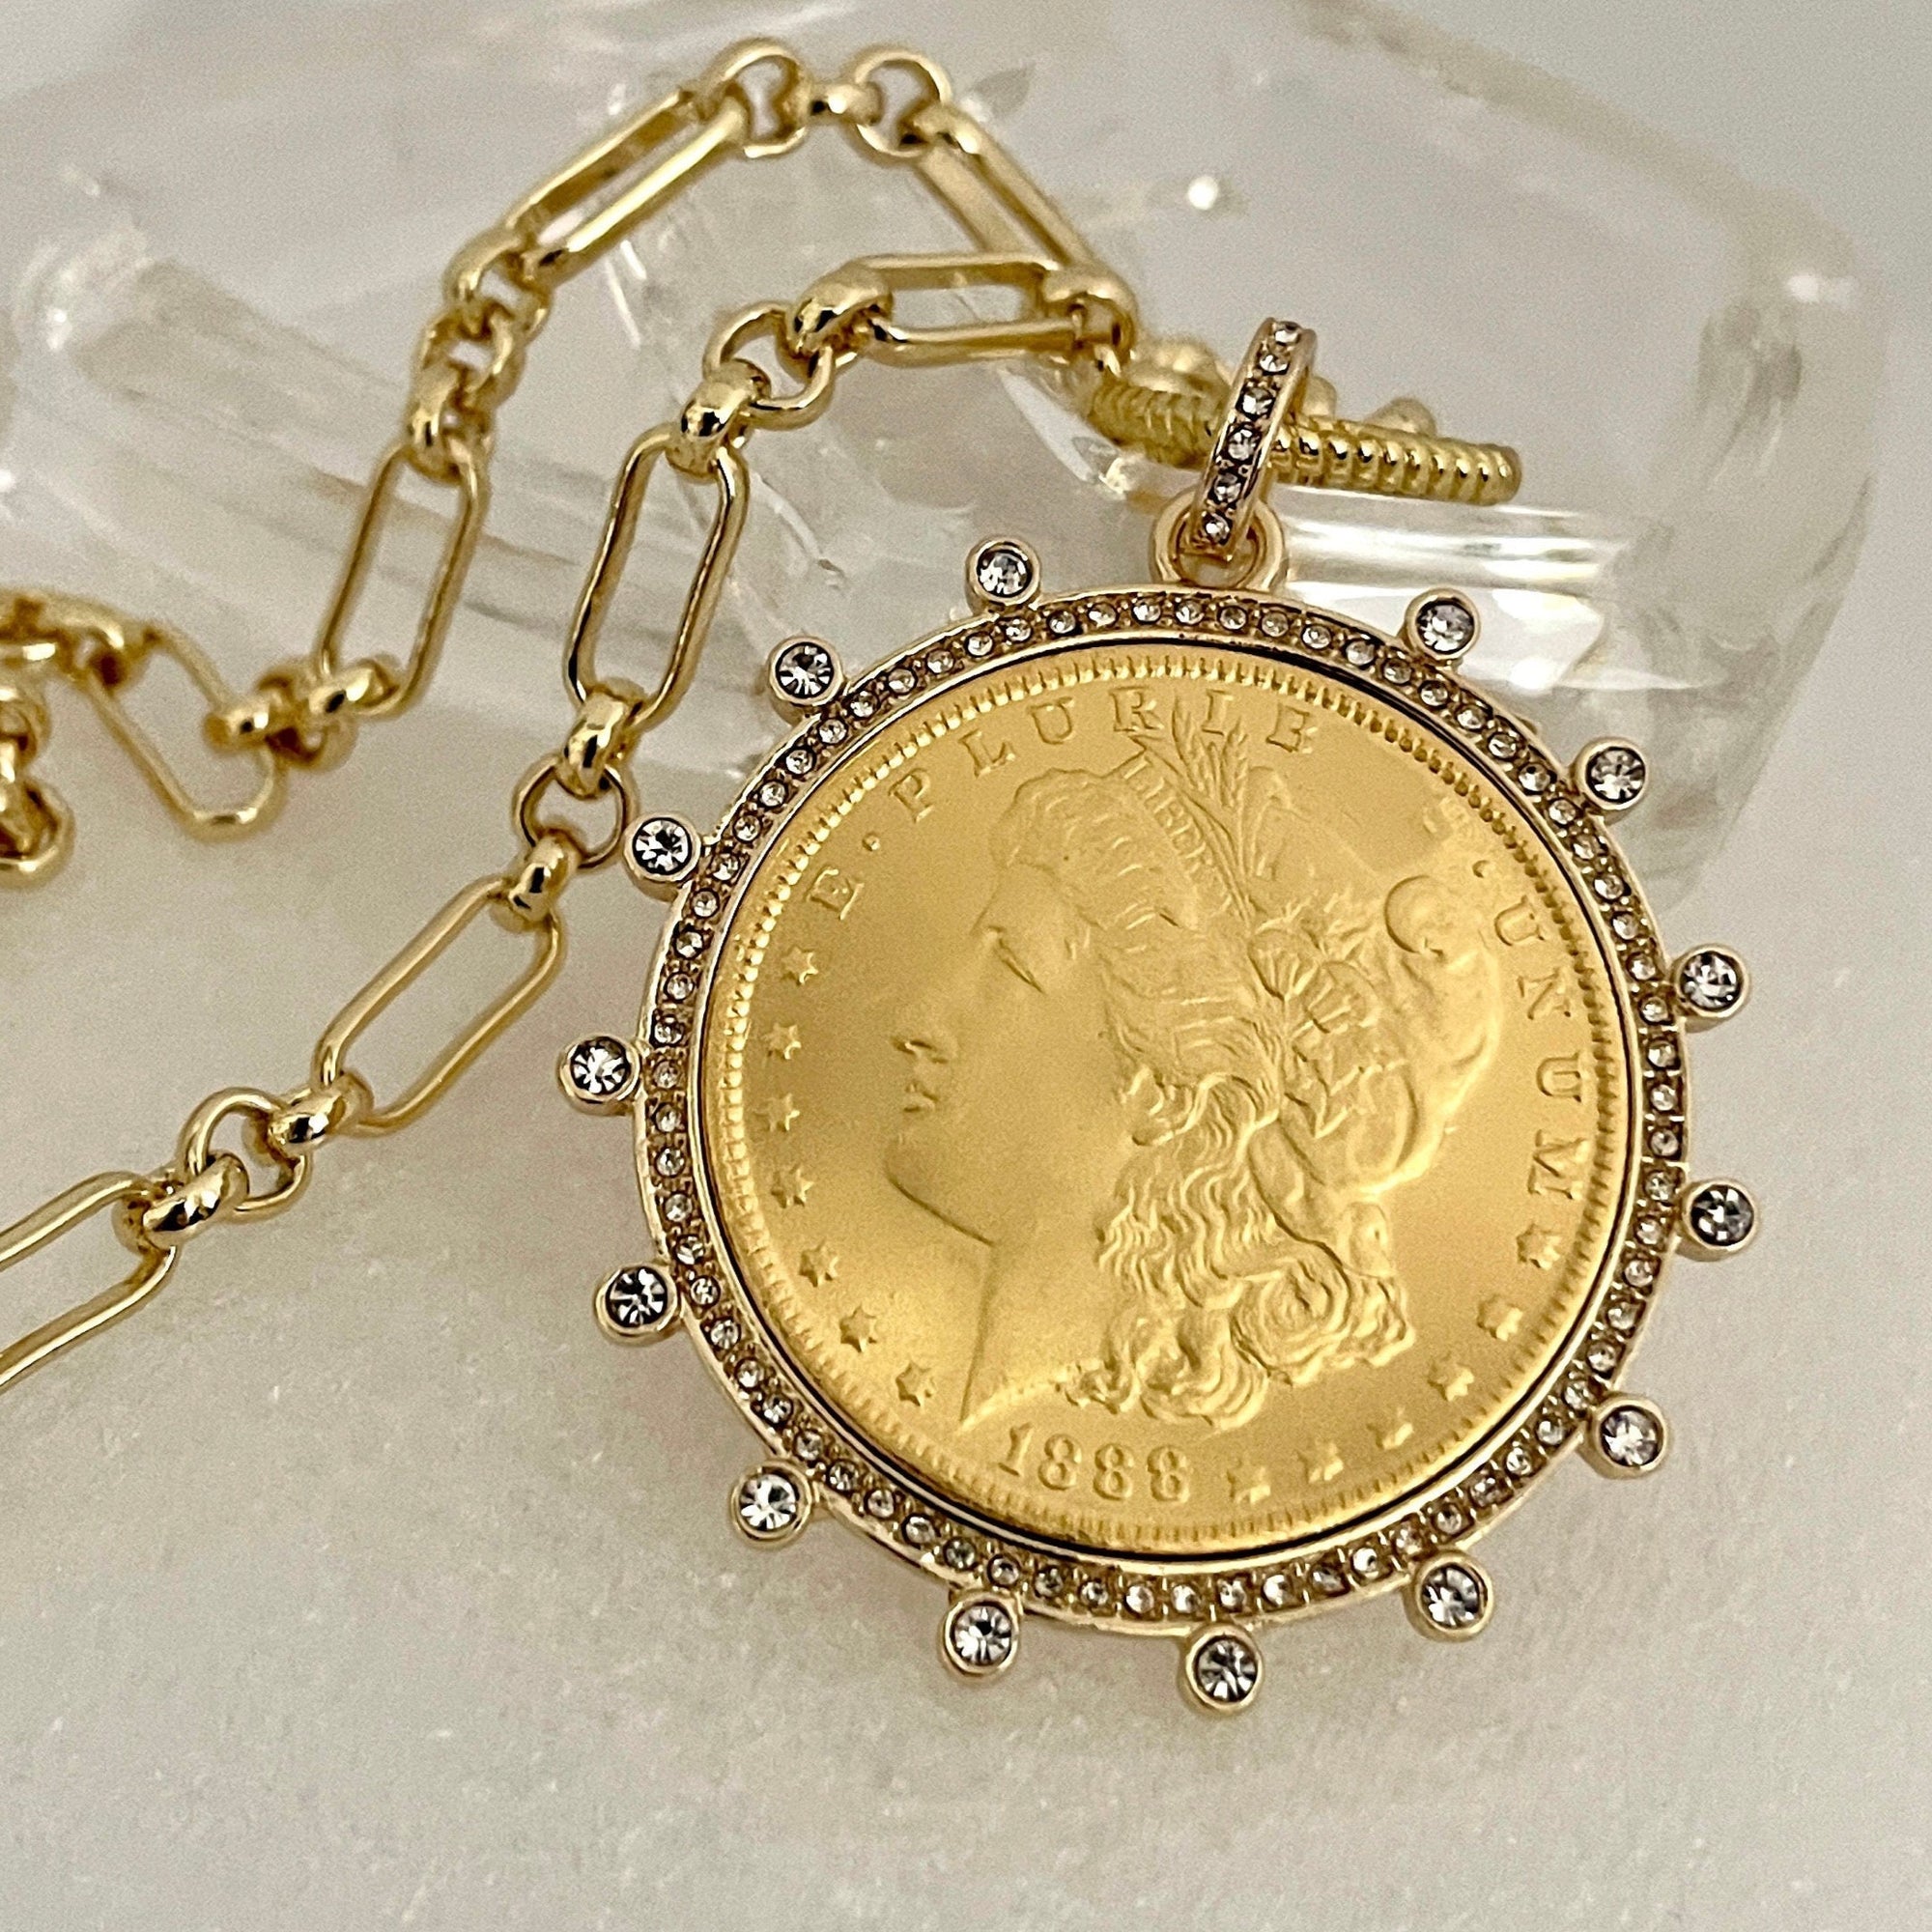 Gold Chain Coin Necklace-Gold Multi-Link Chain-Gold Reproduction Morgan Peace Dollar Coin- Cubic Zirconia Bezel -Spring Lock Clasp